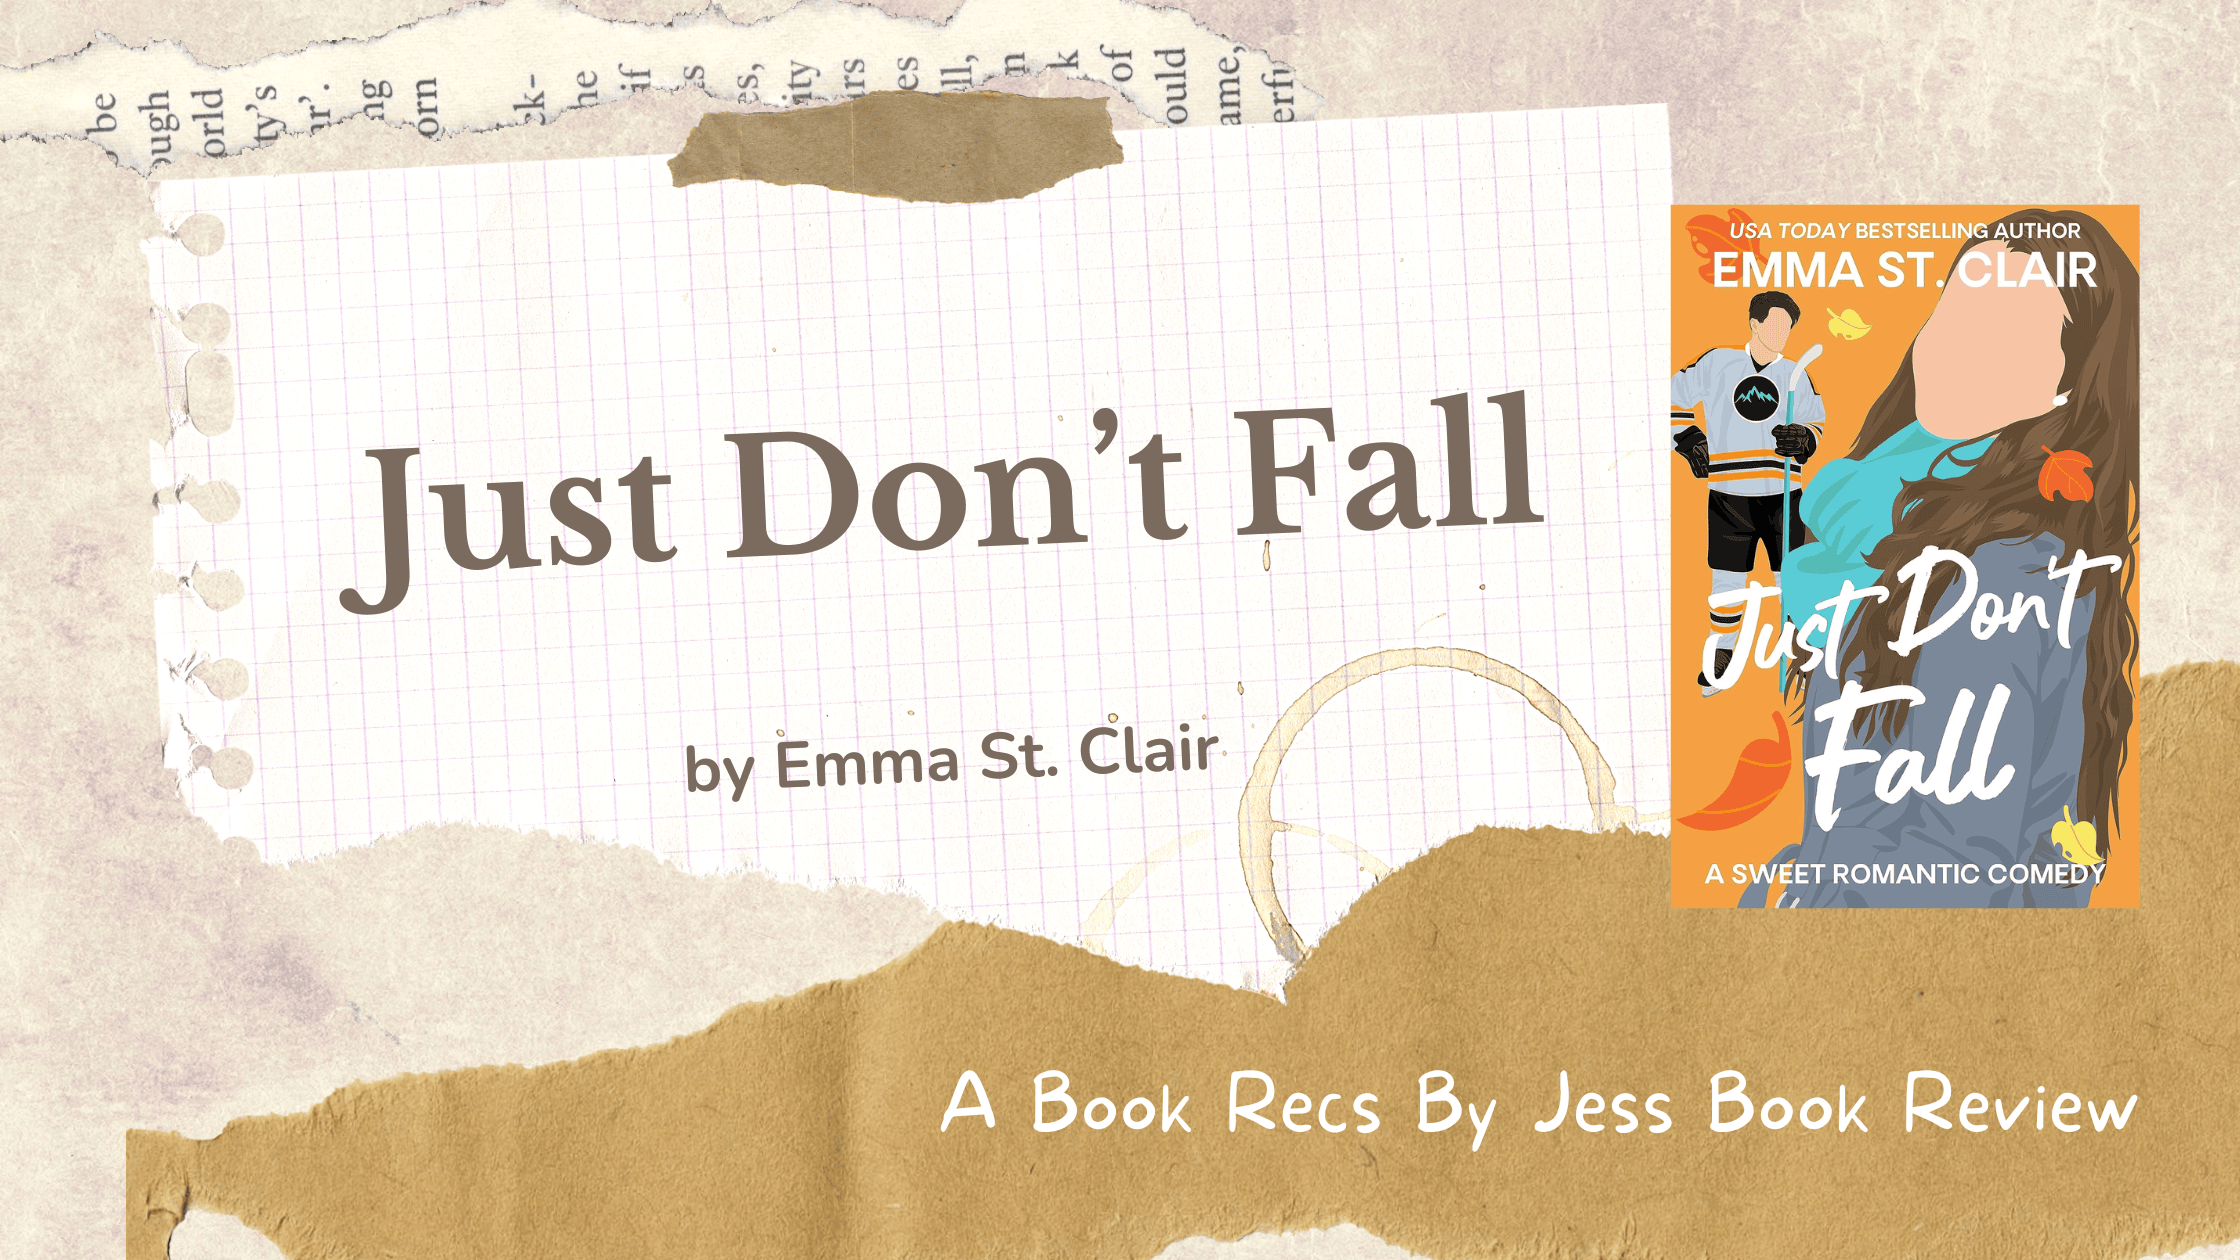 Just Don't Fall by Emma St. Clair book review